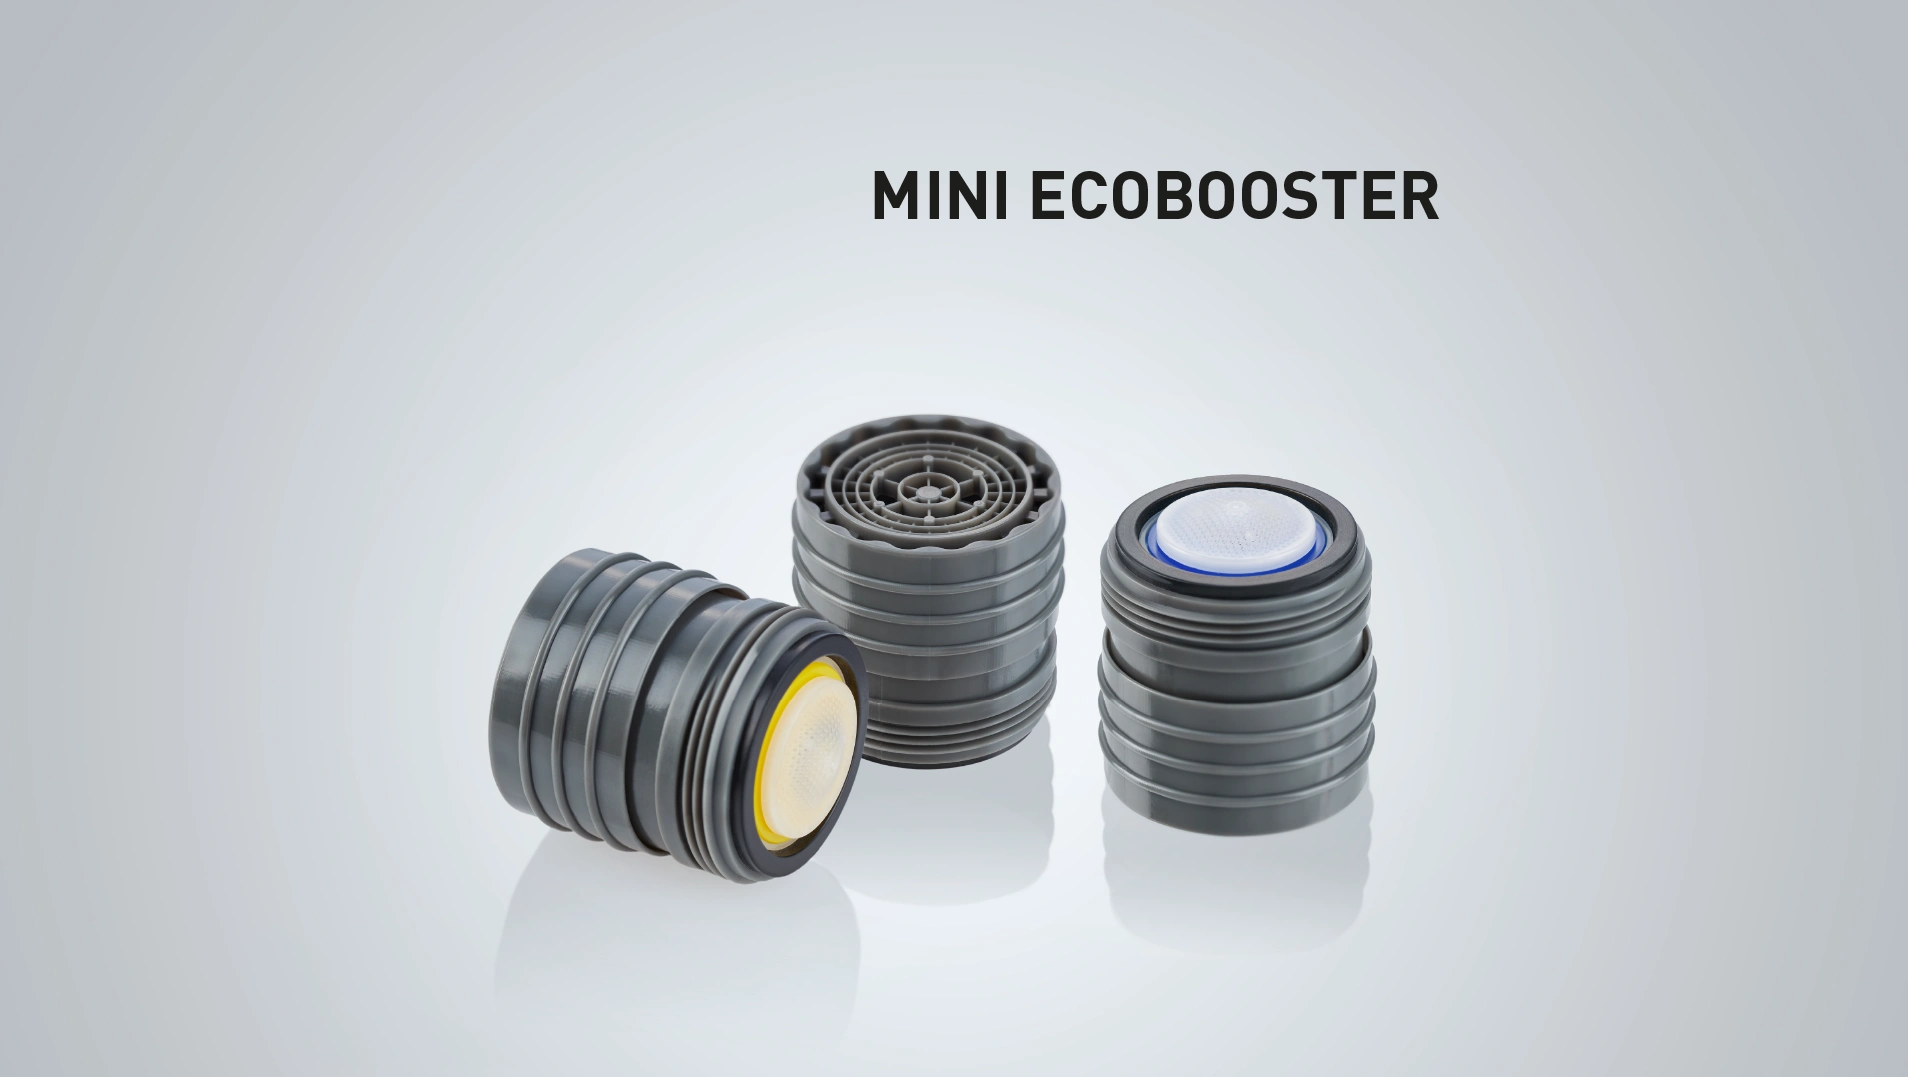 Global_News_NVE_Inno2- MiniEcobooster